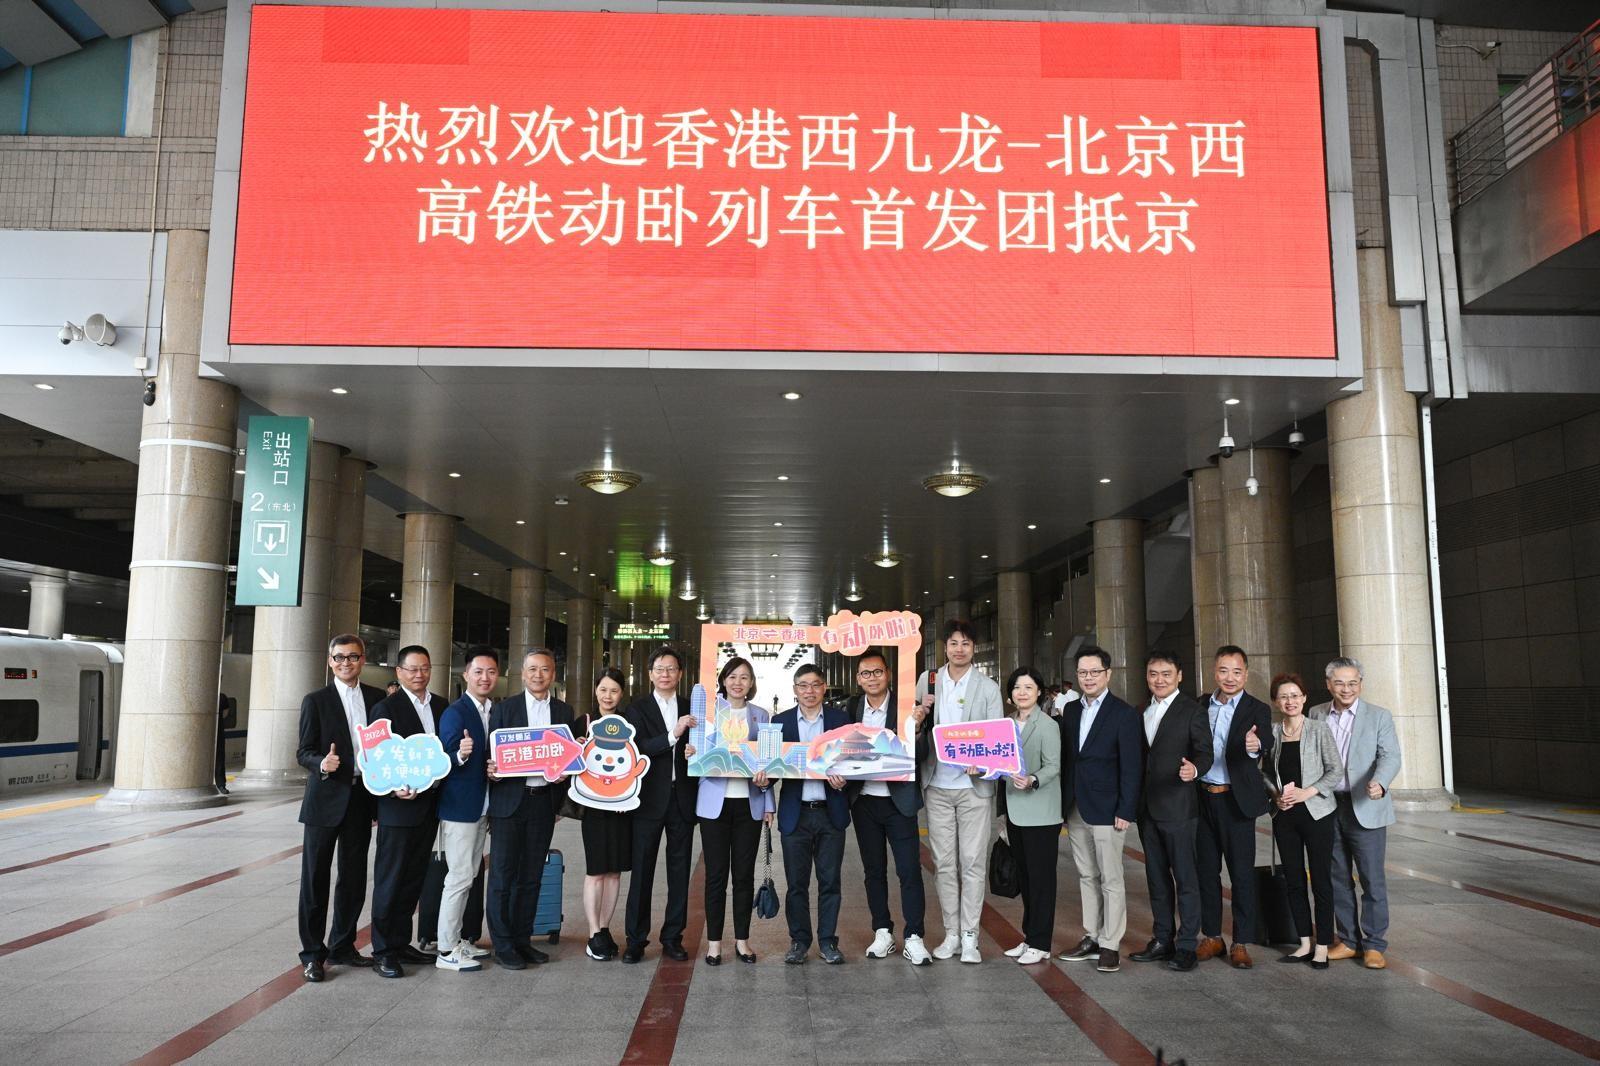 The Secretary for Transport and Logistics, Mr Lam Sai-hung, arrived at the Beijingxi Station this morning (June 16) after taking the inaugural sleeper train of the Guangzhou-Shenzhen-Hong Kong Express Rail Link. Photo shows Mr Lam (eighth left) pictured with the Managing Director – Hong Kong Transport Services of the MTR Corporation Limited, Ms Jeny Yeung (seventh left) and other guests at the platform of the Beijingxi Station.